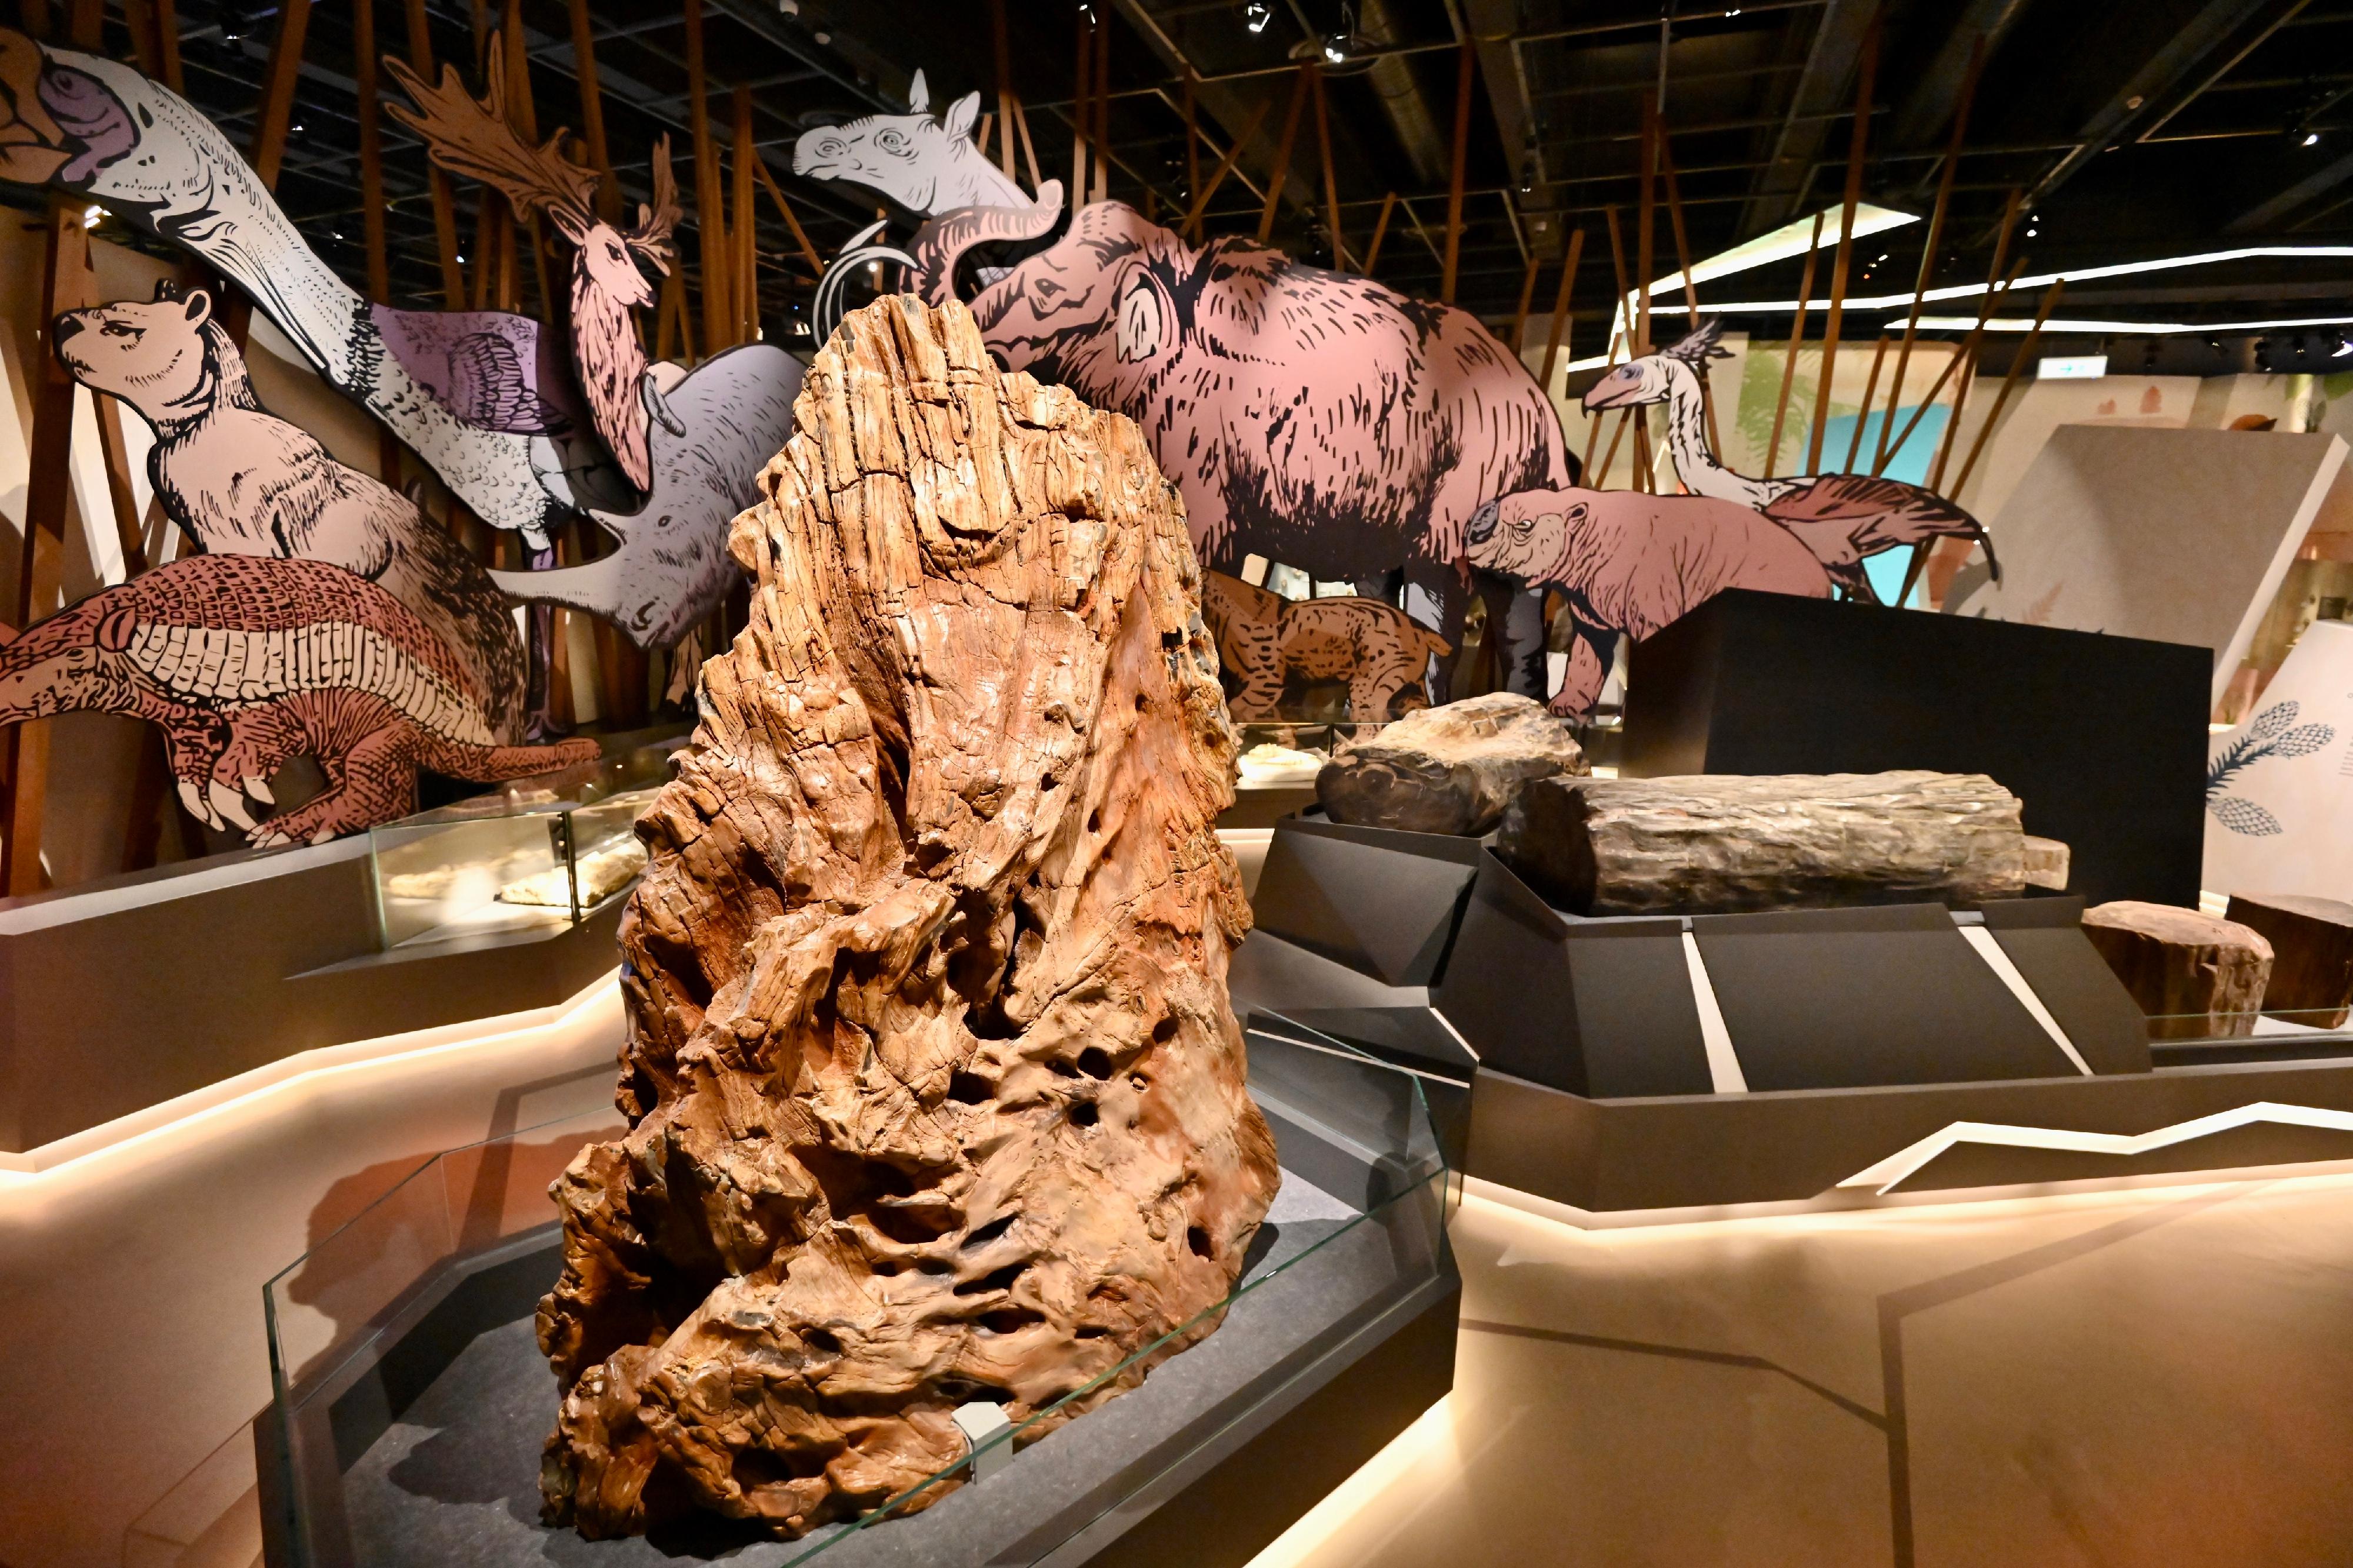 The Hong Kong Science Museum's new exhibition "Extinction·Resilience" will be open to the public from tomorrow (September 15). Photo shows fossilised Dryobalanoxylon wood specimens that were formed during volcanic eruptions in Indonesia 2 to 4 million years ago. (Courtesy of Nina Park of Chinachem Group)